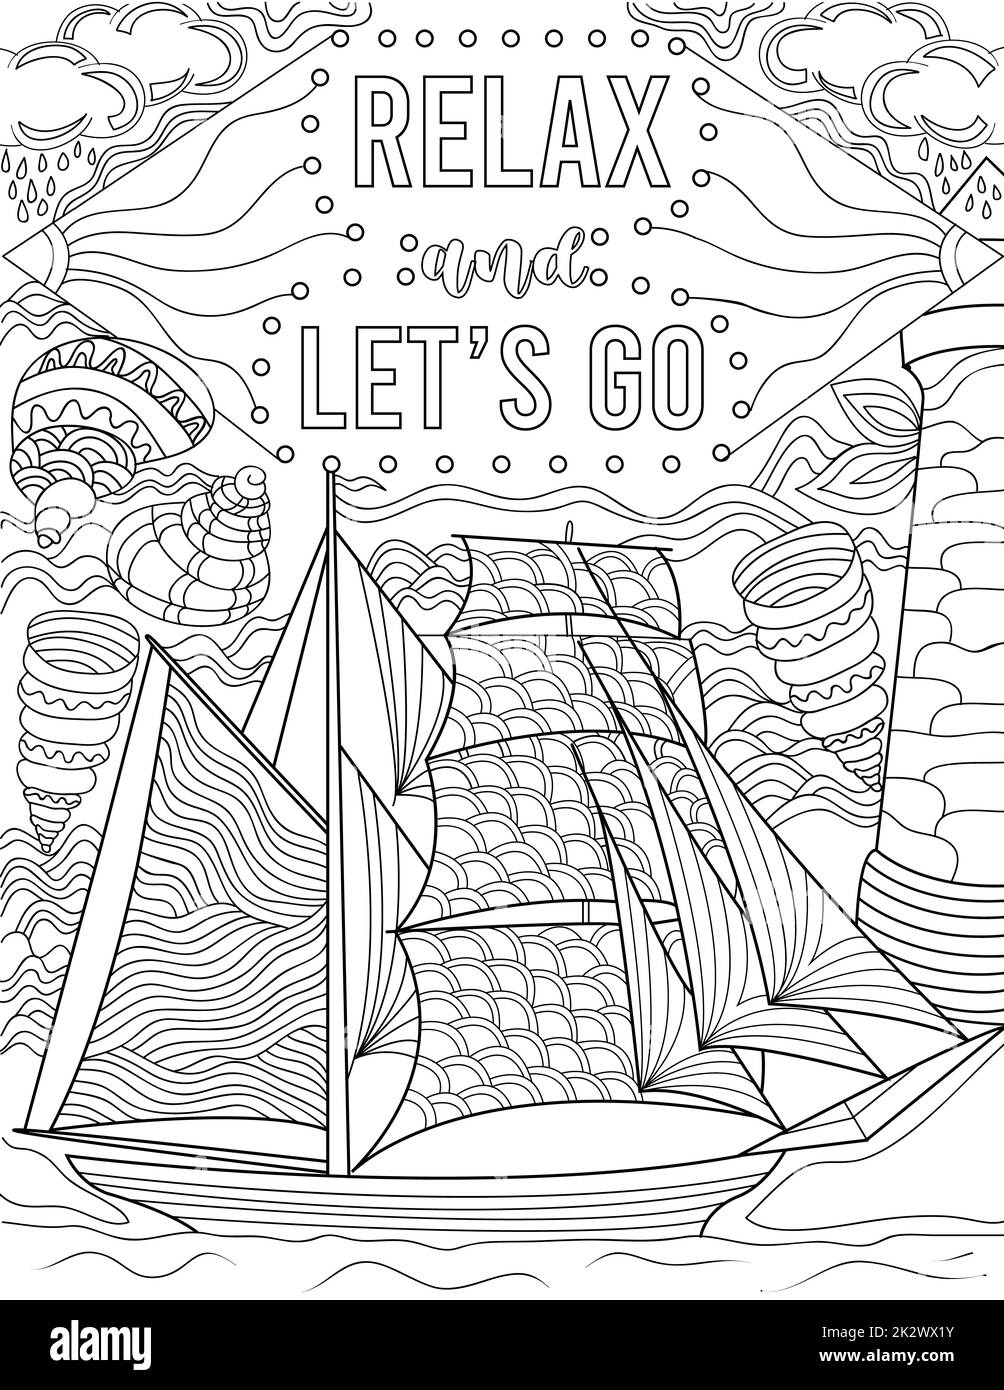 Illustration Of A Sailboat Floating On The Ocean Surrounded By Seashells Under Inspirational Note. Boat Line Drawing Sailing At Sea Around Shells Beneath Positive Message. Stock Photo